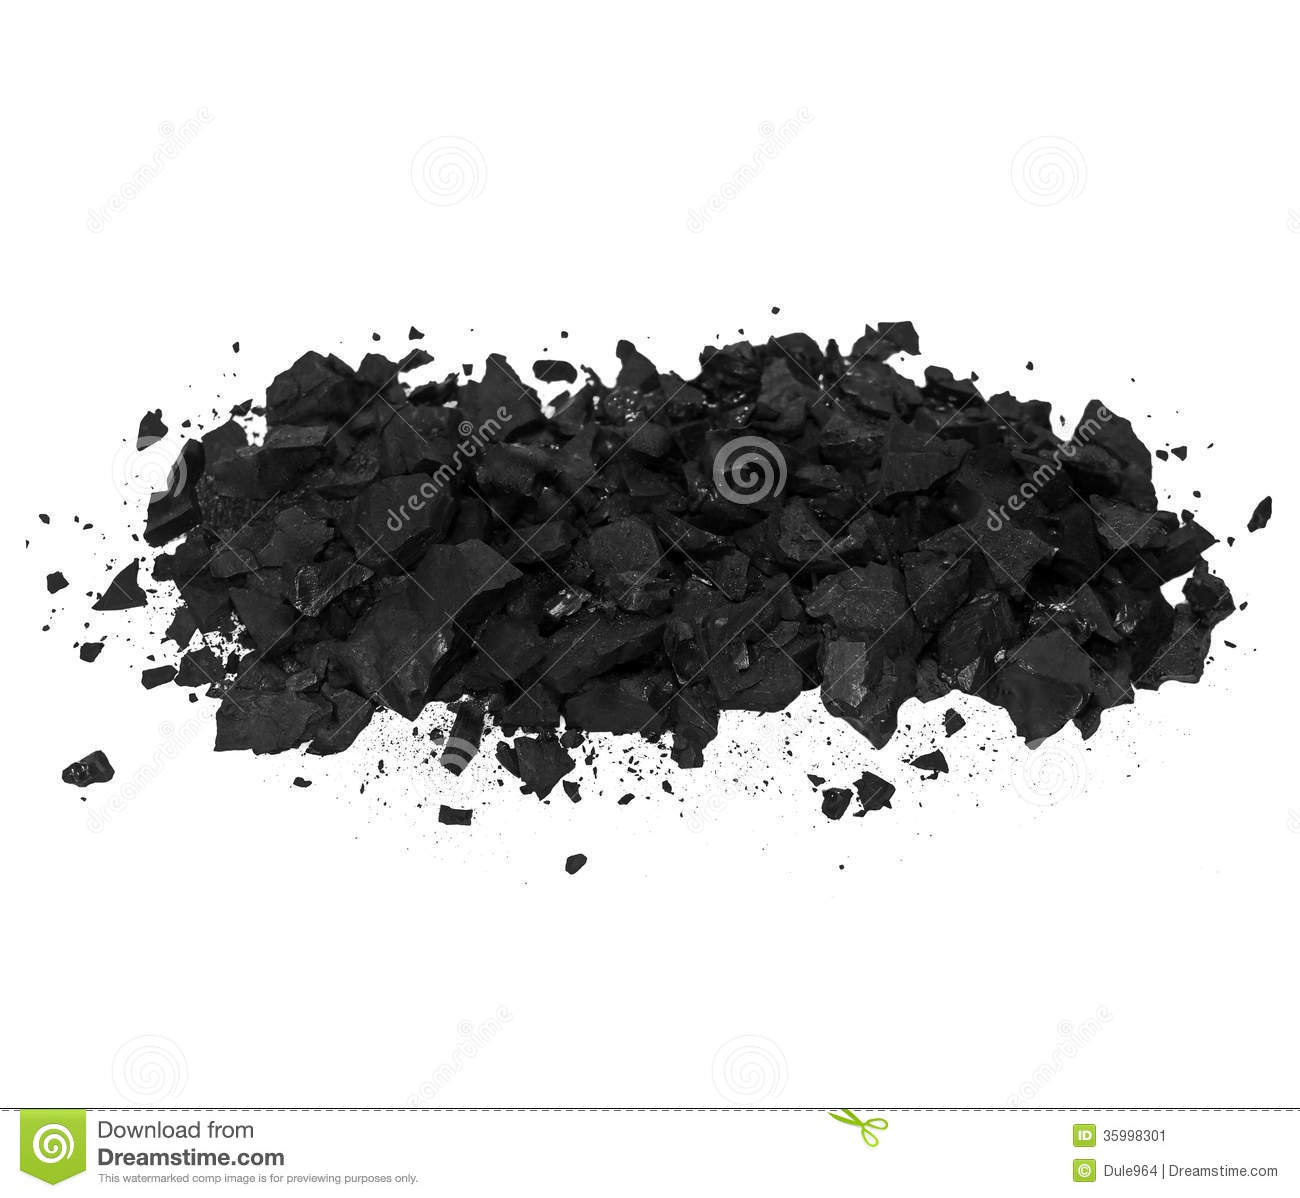 Pile Of Coal Clipart Pile Black Coal Isolated On